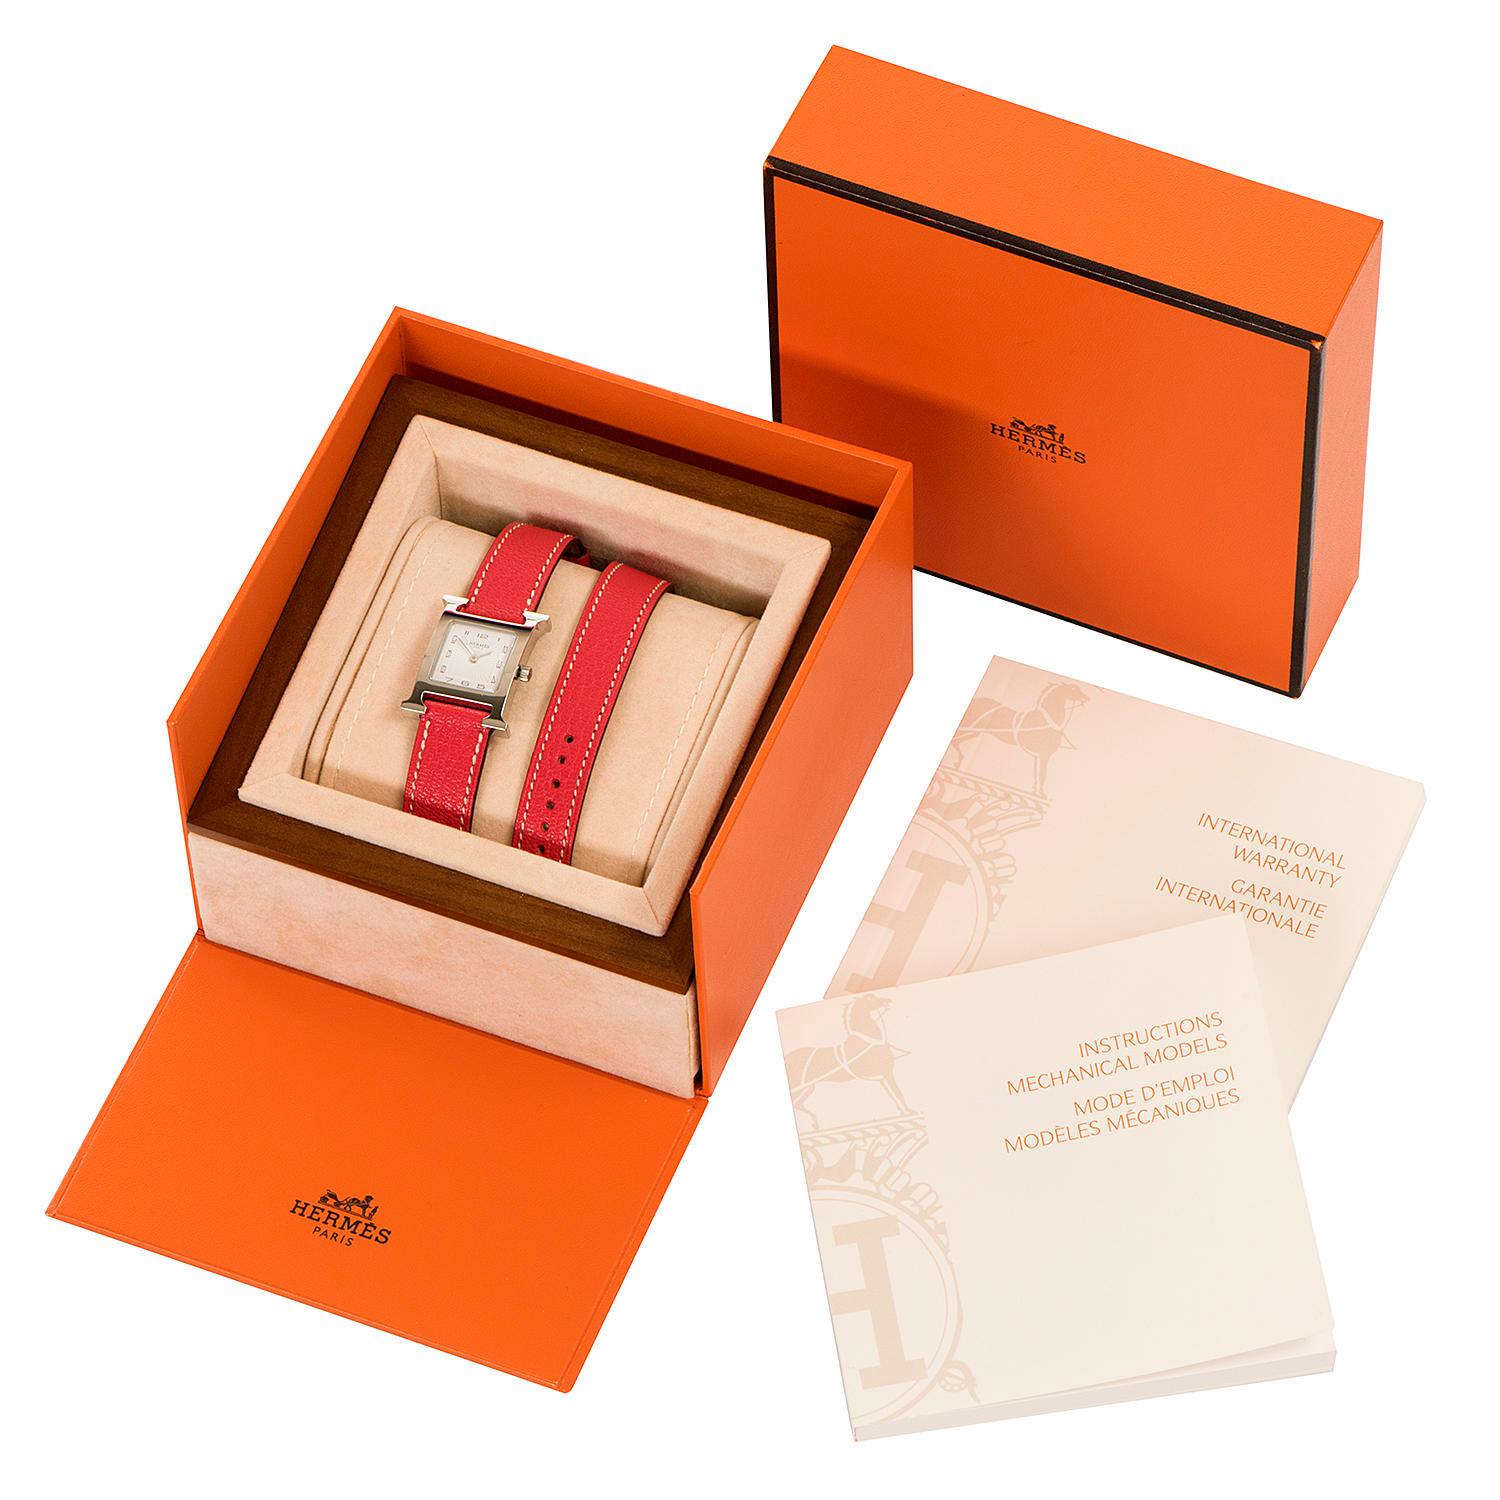 AS NEW - A Boxed Hermes Ladies 'Heure H' double Strap Silver Palladium Watch 5